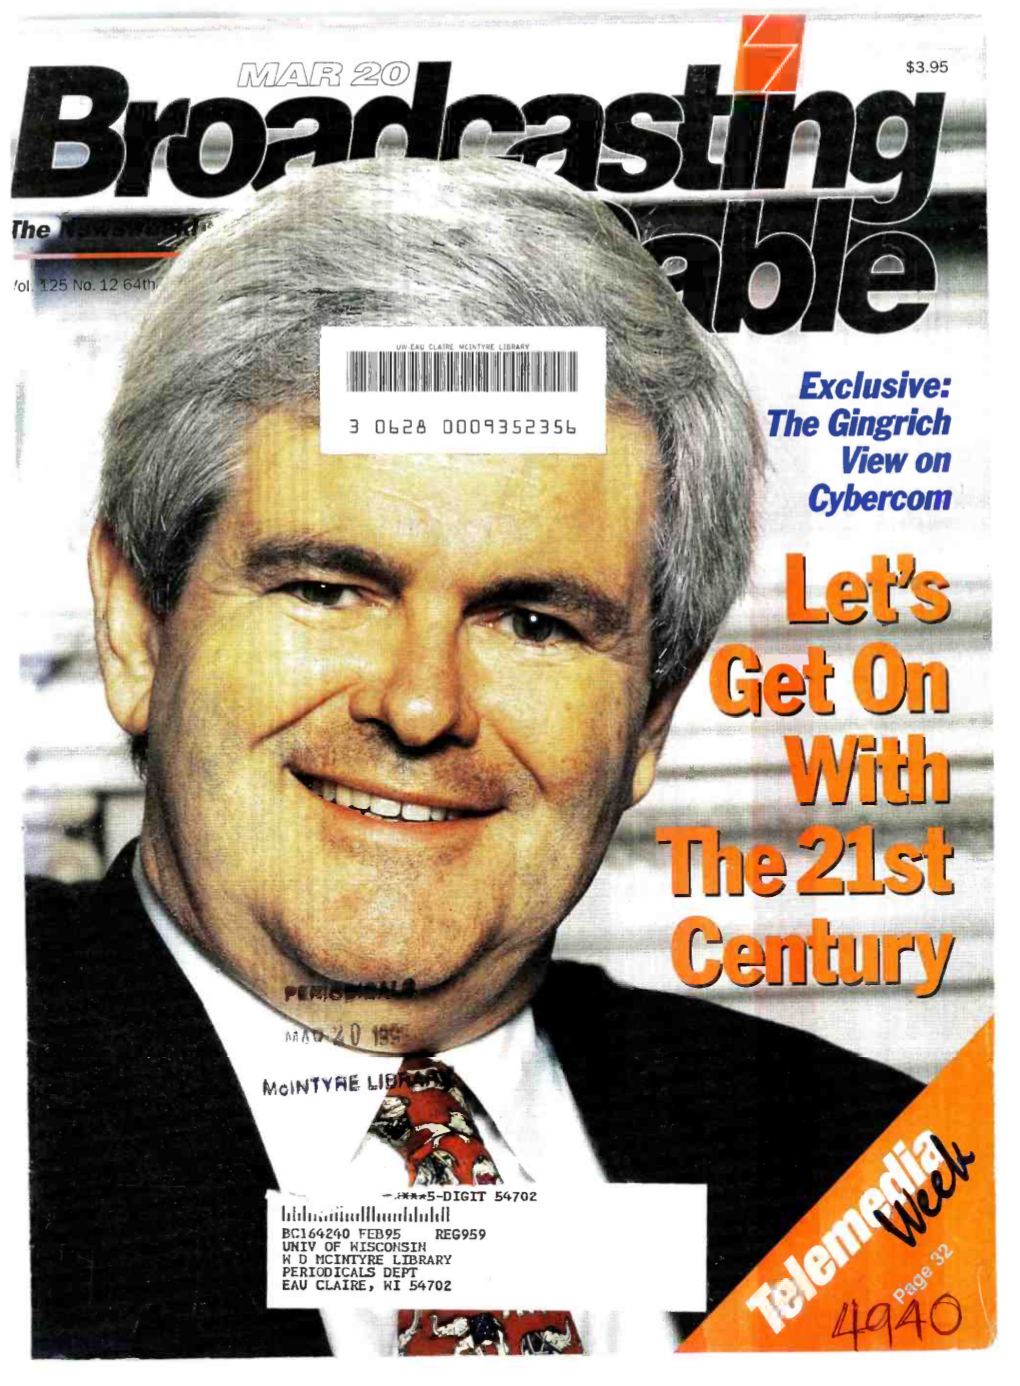 Exclusive: the Gingrich View on Cybercom